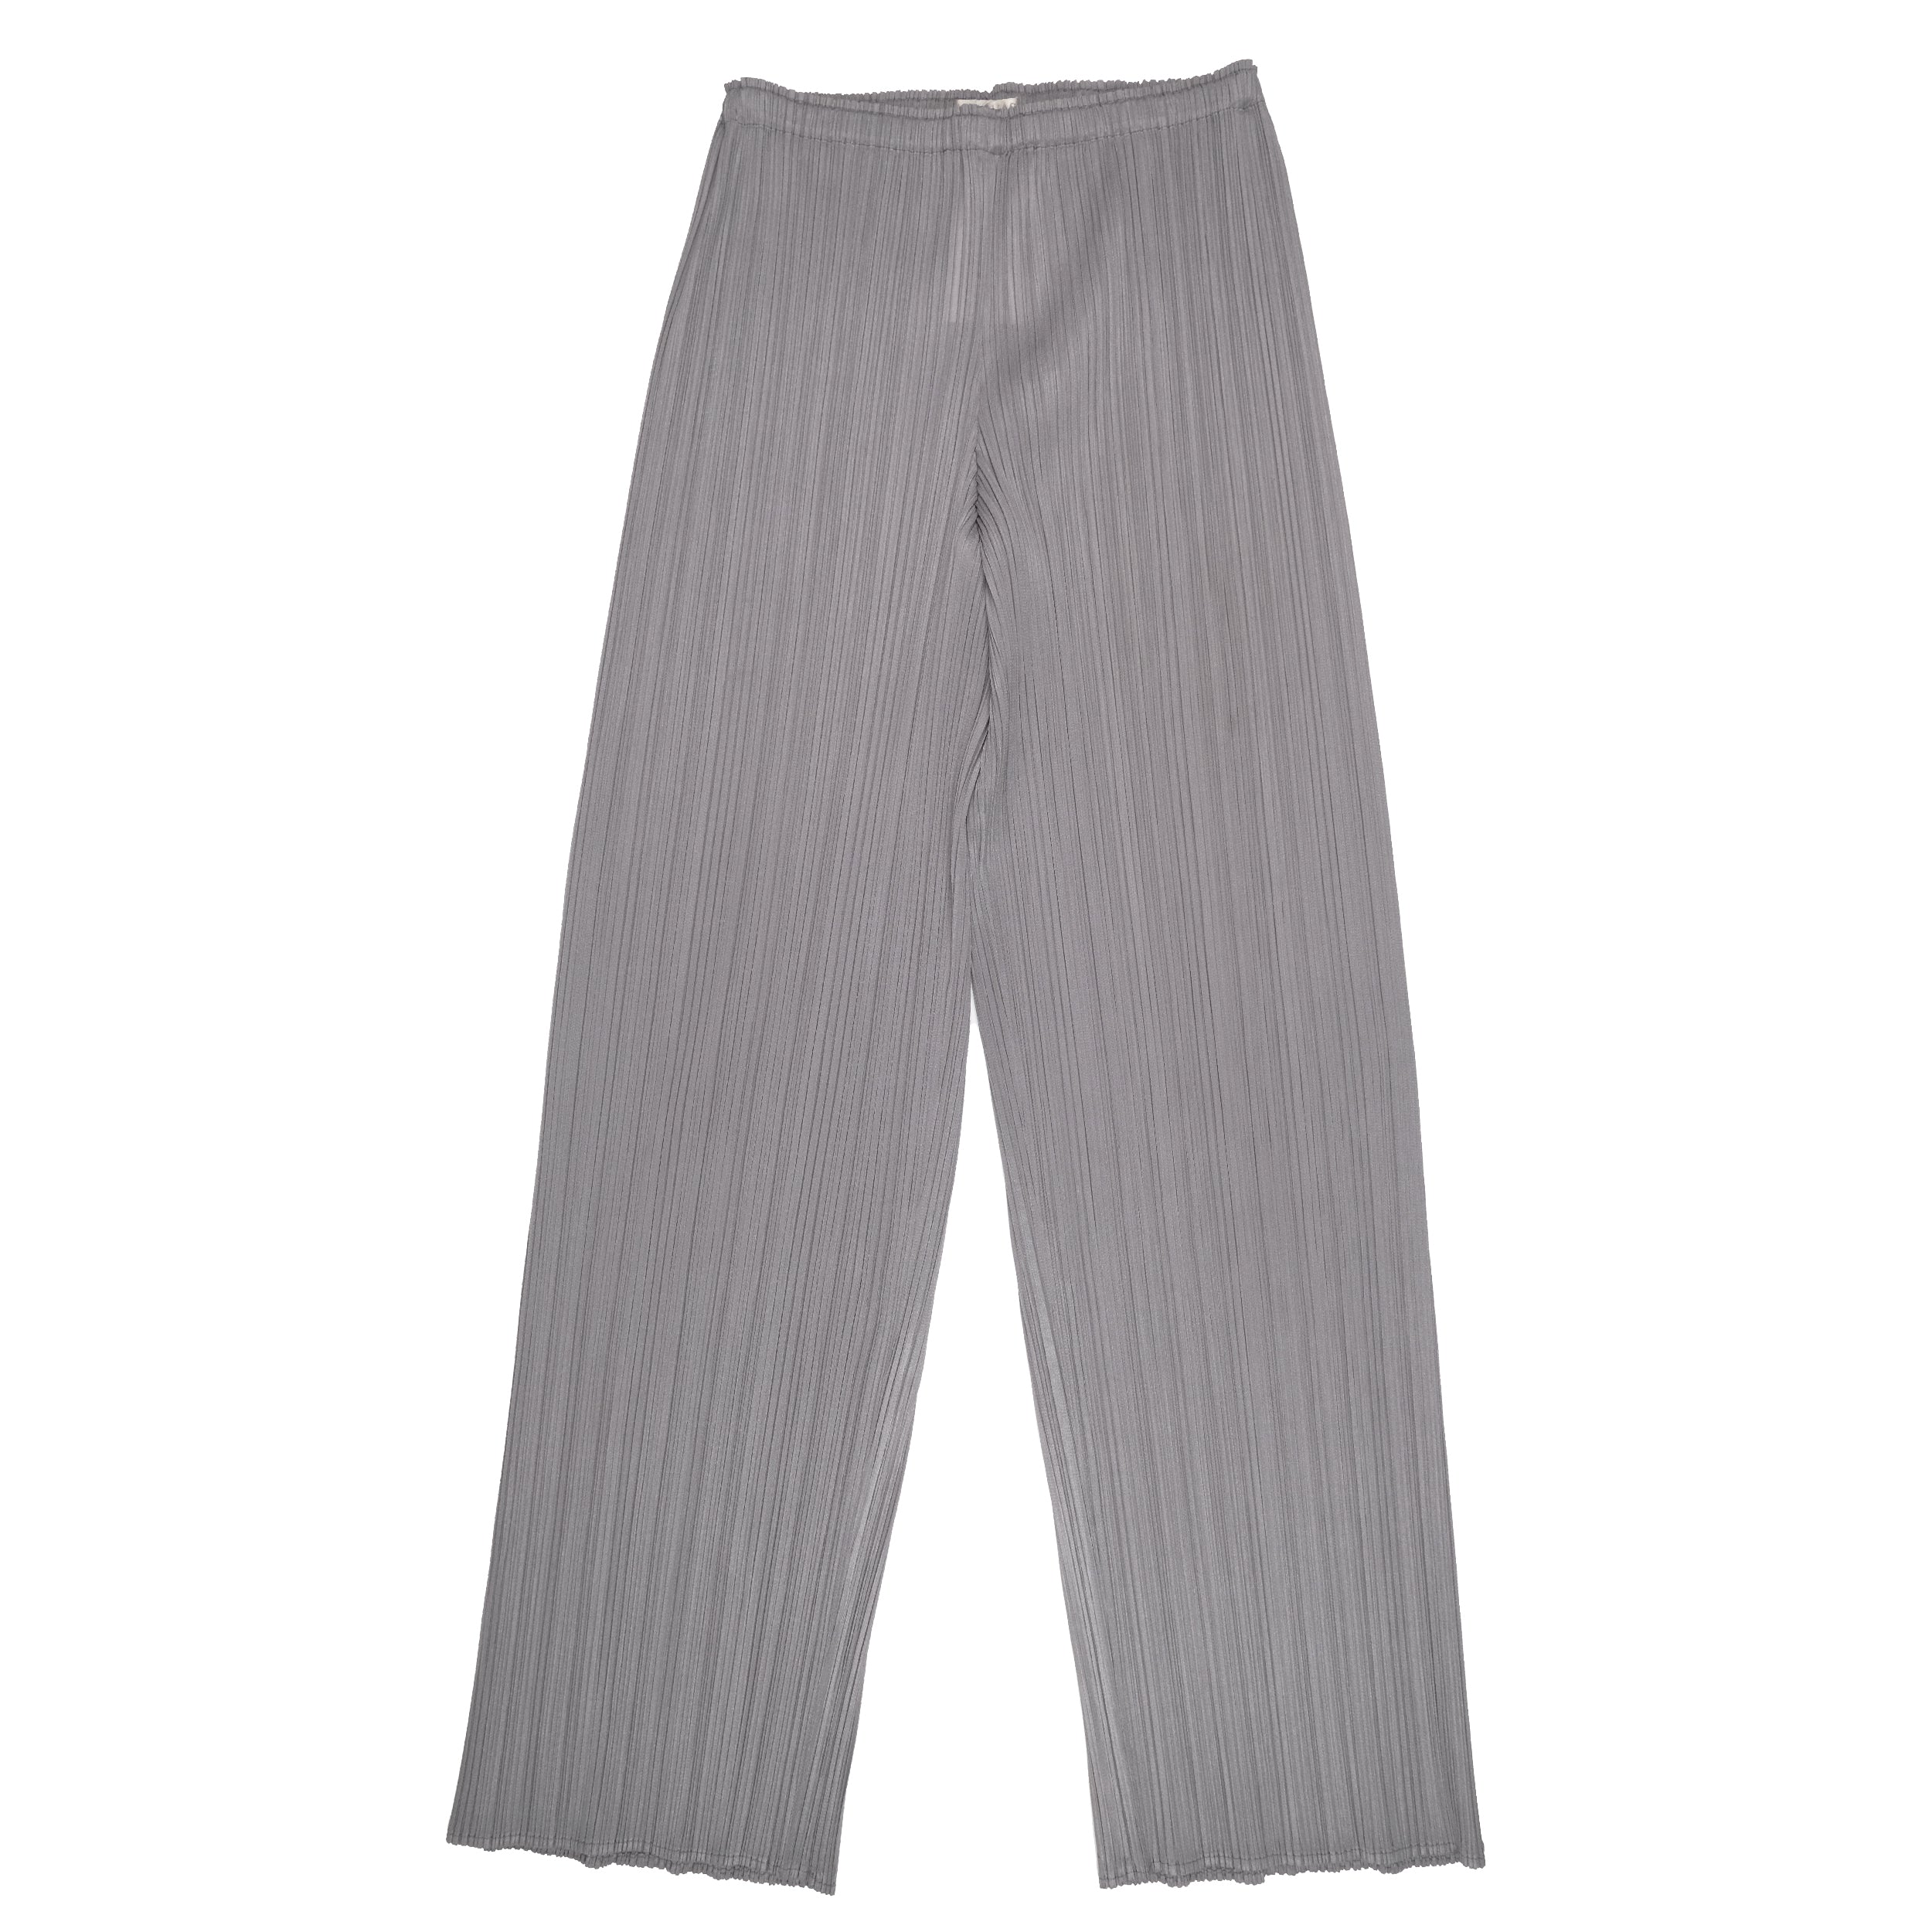 How To Style PLEATED Trousers  Homme Plissé Issey Miyake Review  Styling   Sizing  YouTube